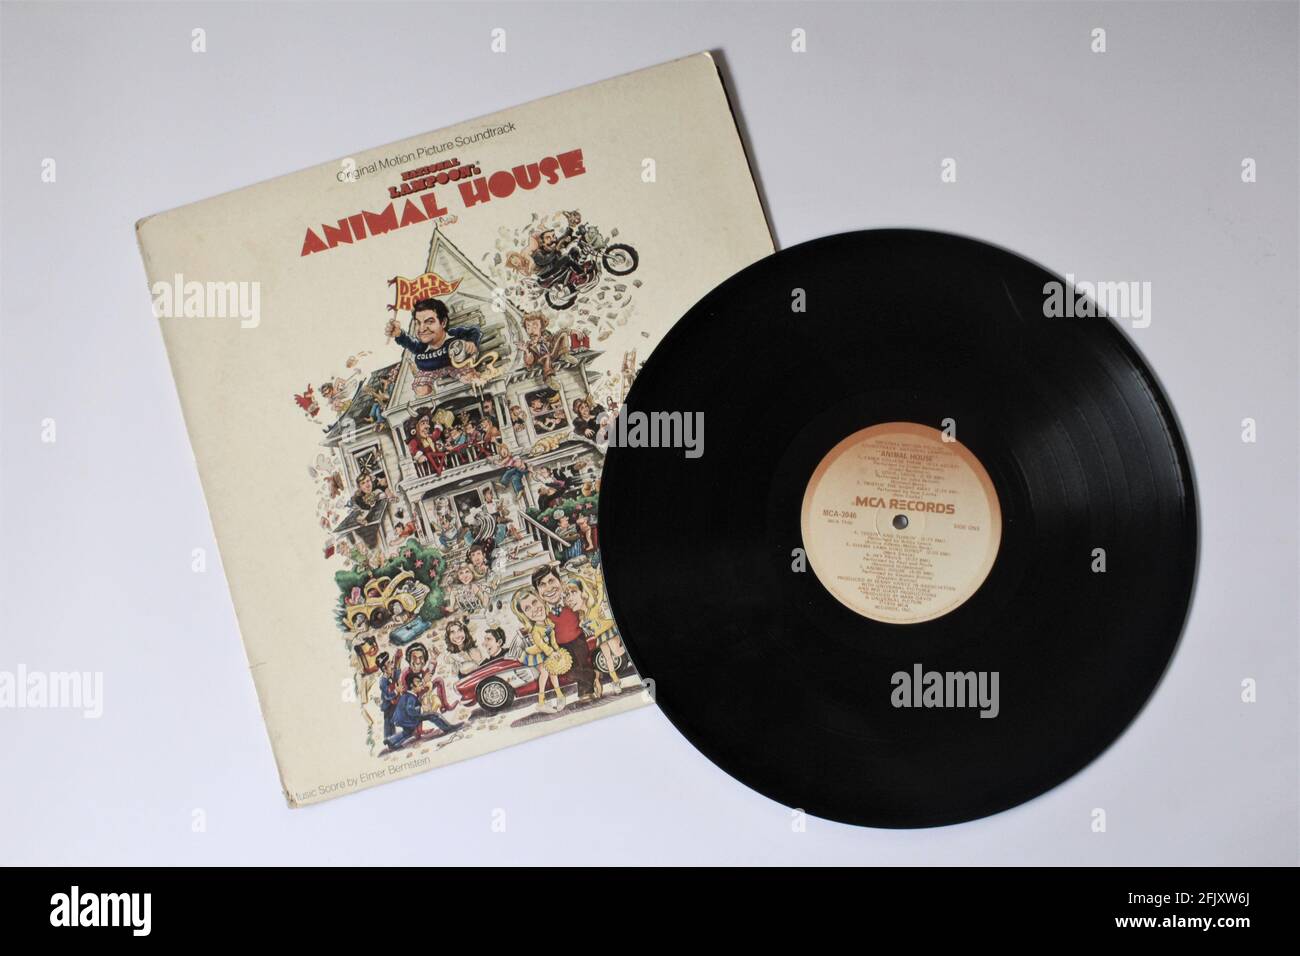 National Lampoon's Animal House Original Motion Picture Soundtrack music album on vinyl record LP disc. Classic movie. Stock Photo